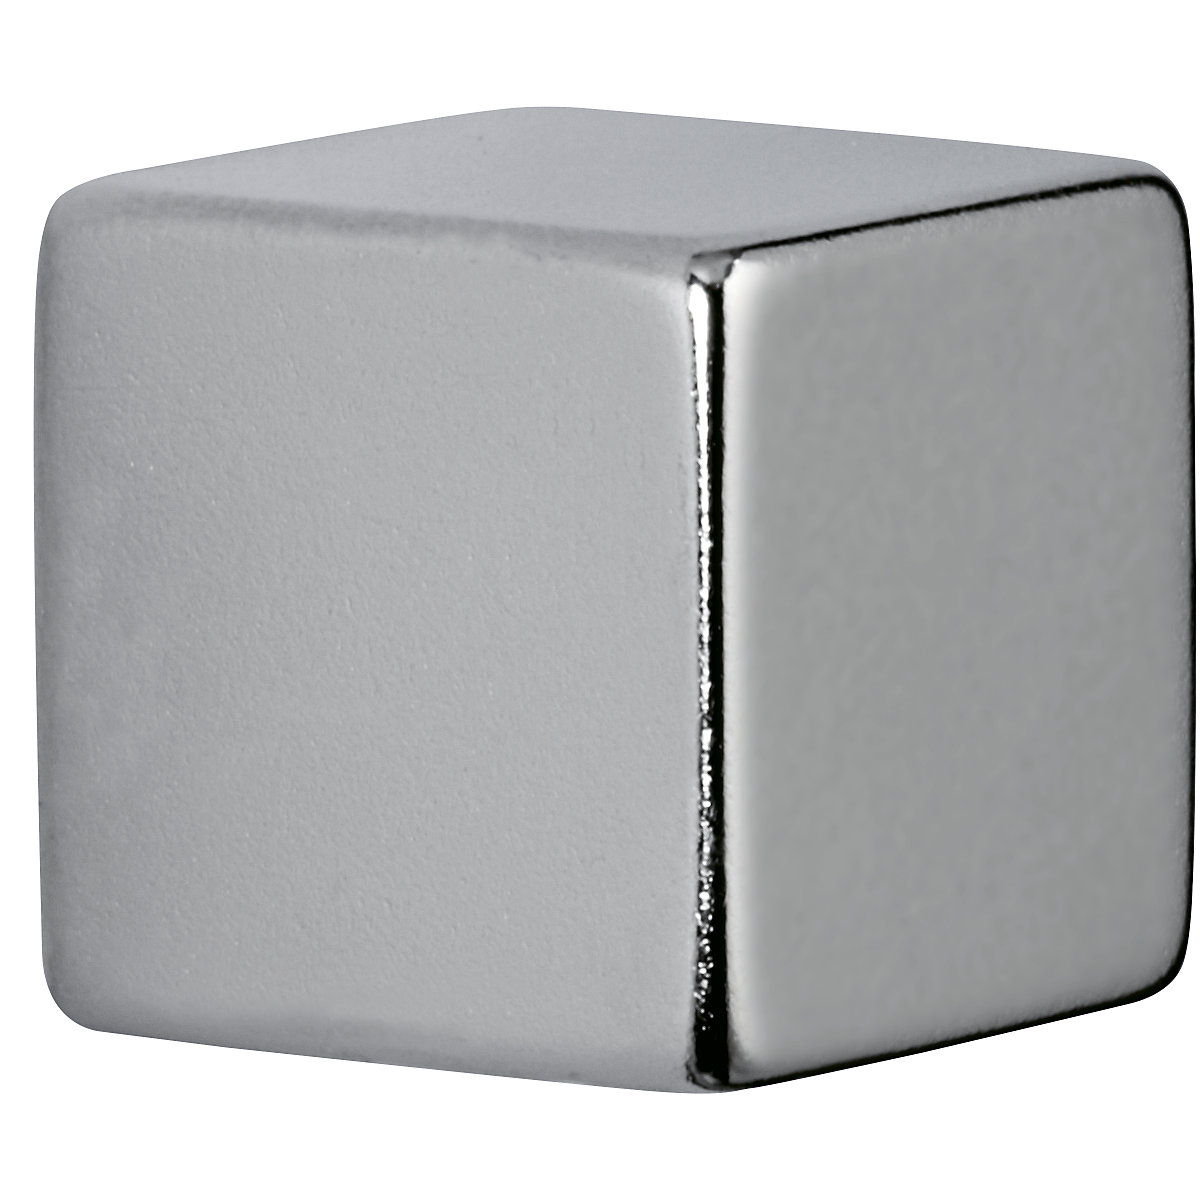 Neodymium cube magnet – MAUL, nickel plated, holds 20 kg, pack of 4-3